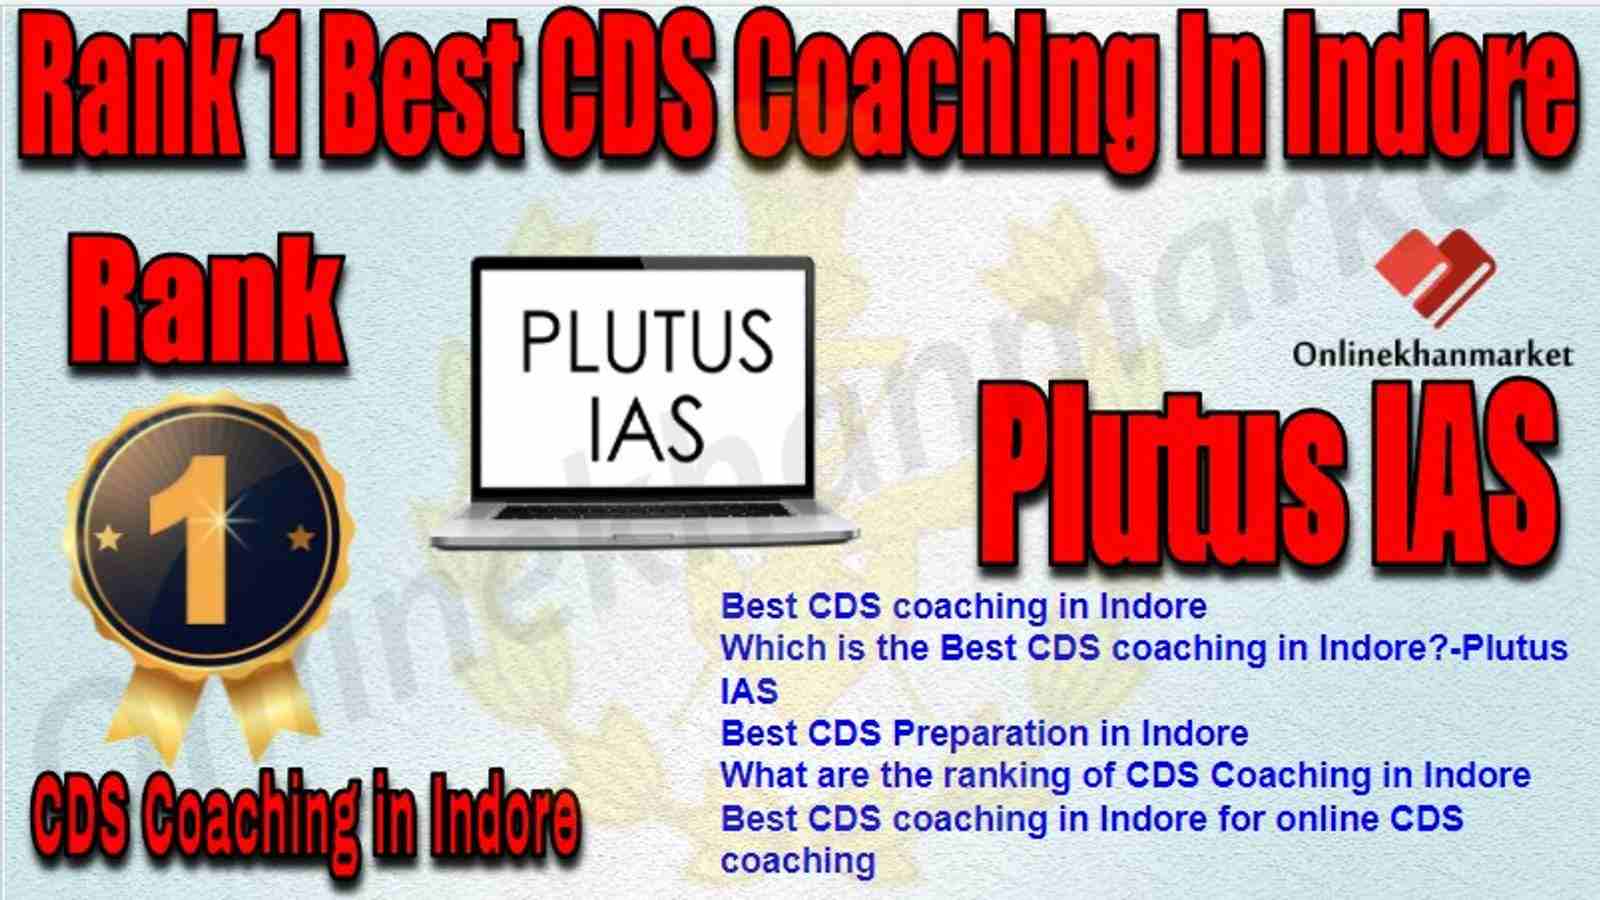 Rank 1 Best CDS Coaching in indore